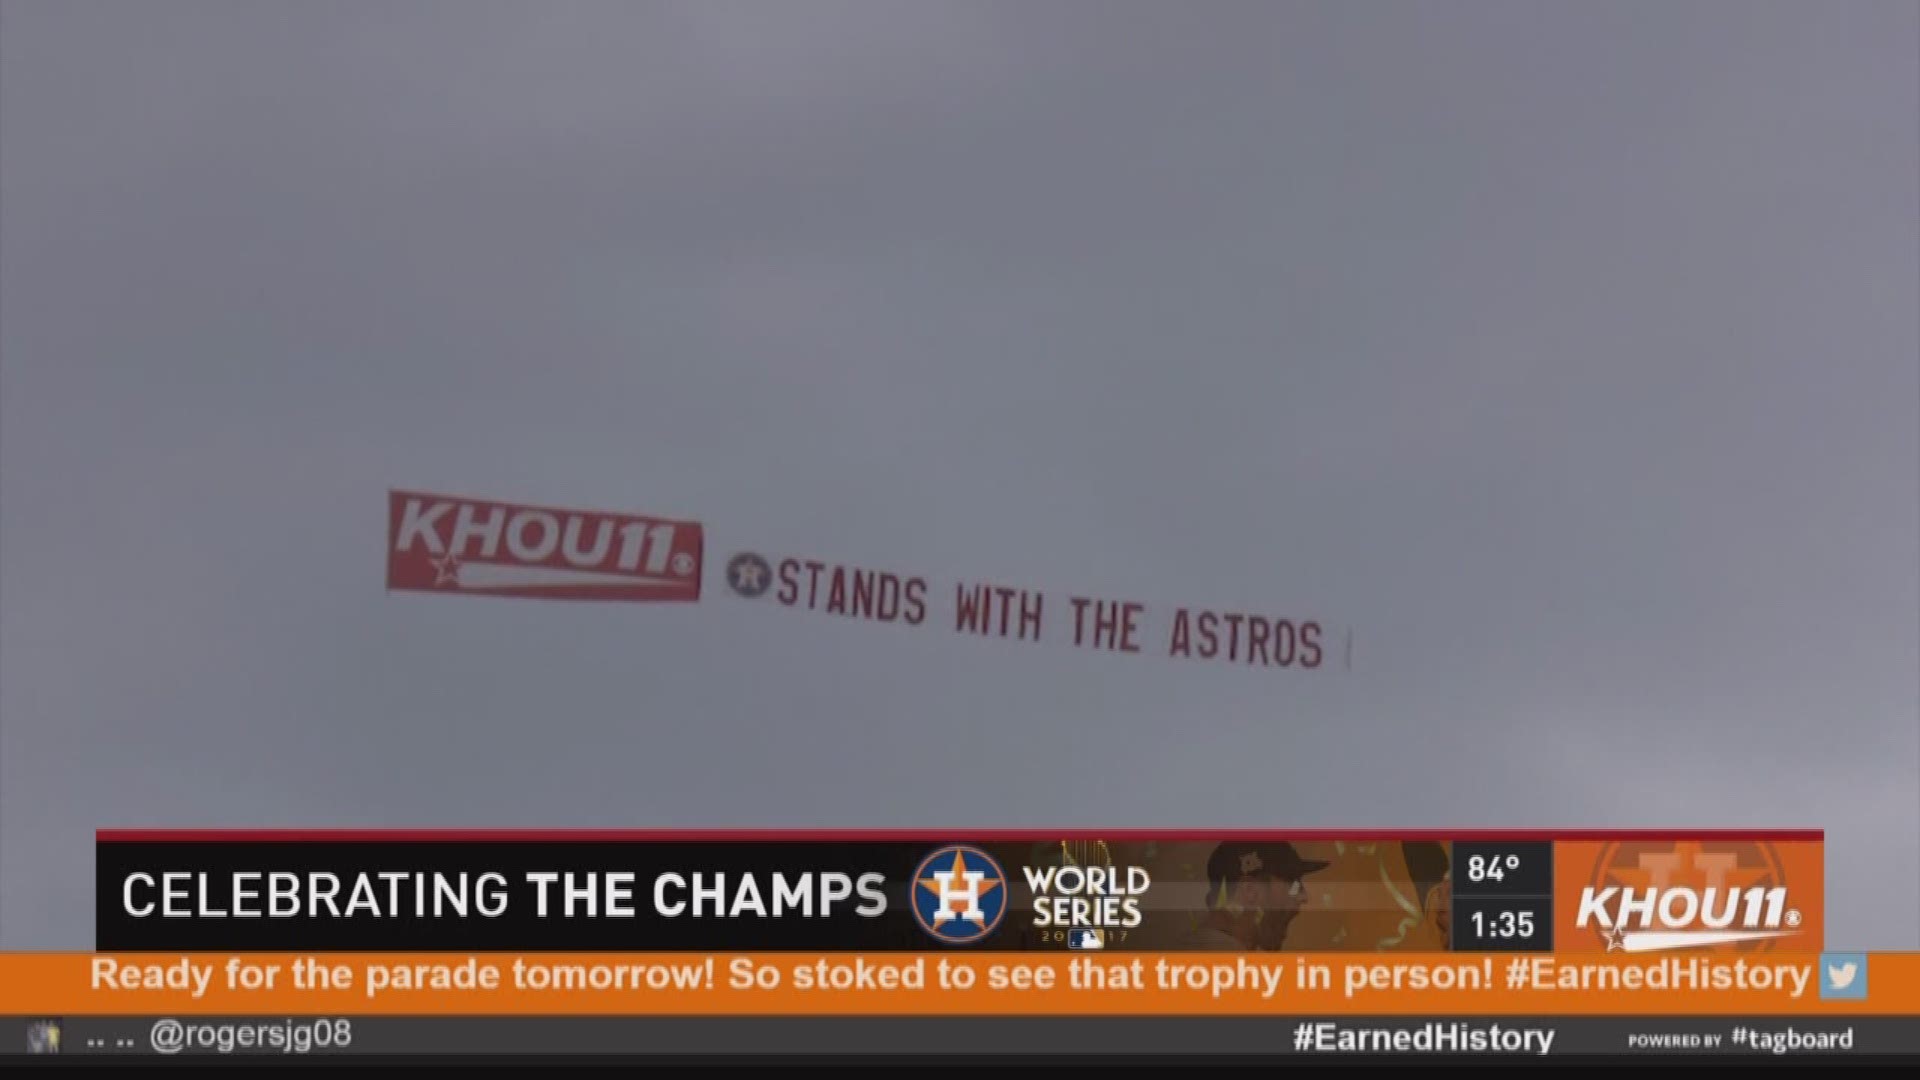 Watch for KHOU's banner plane flying over the Houston Astros World Series Championship Parade. The banner reads "KHOU STANDS WITH THE ASTROS."